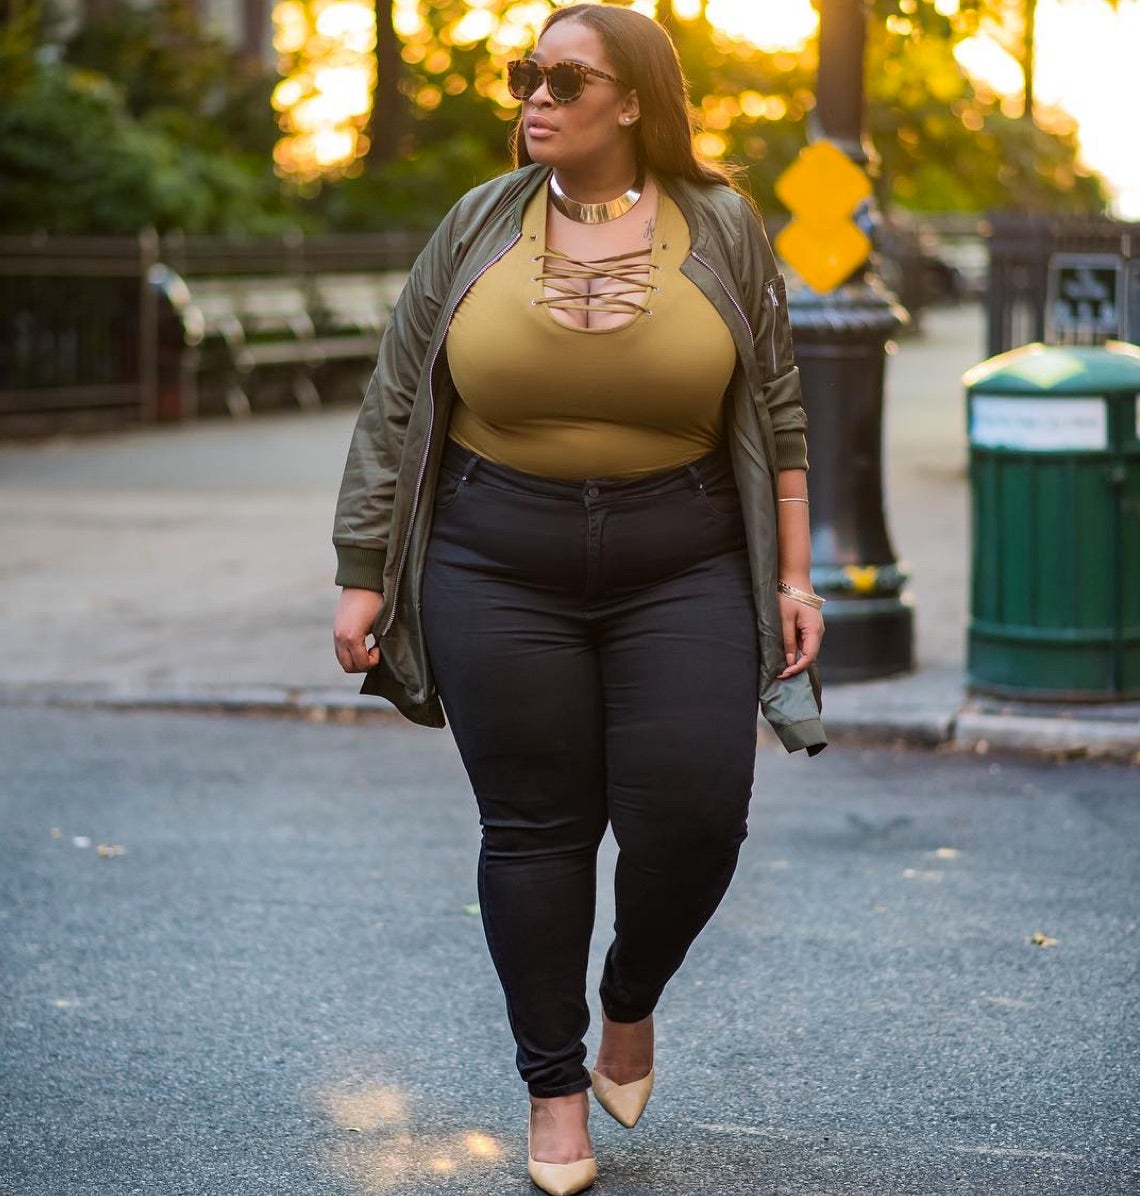 These Plus Size Influencers Are Giving Us All the Fall Fashion Inspiration!